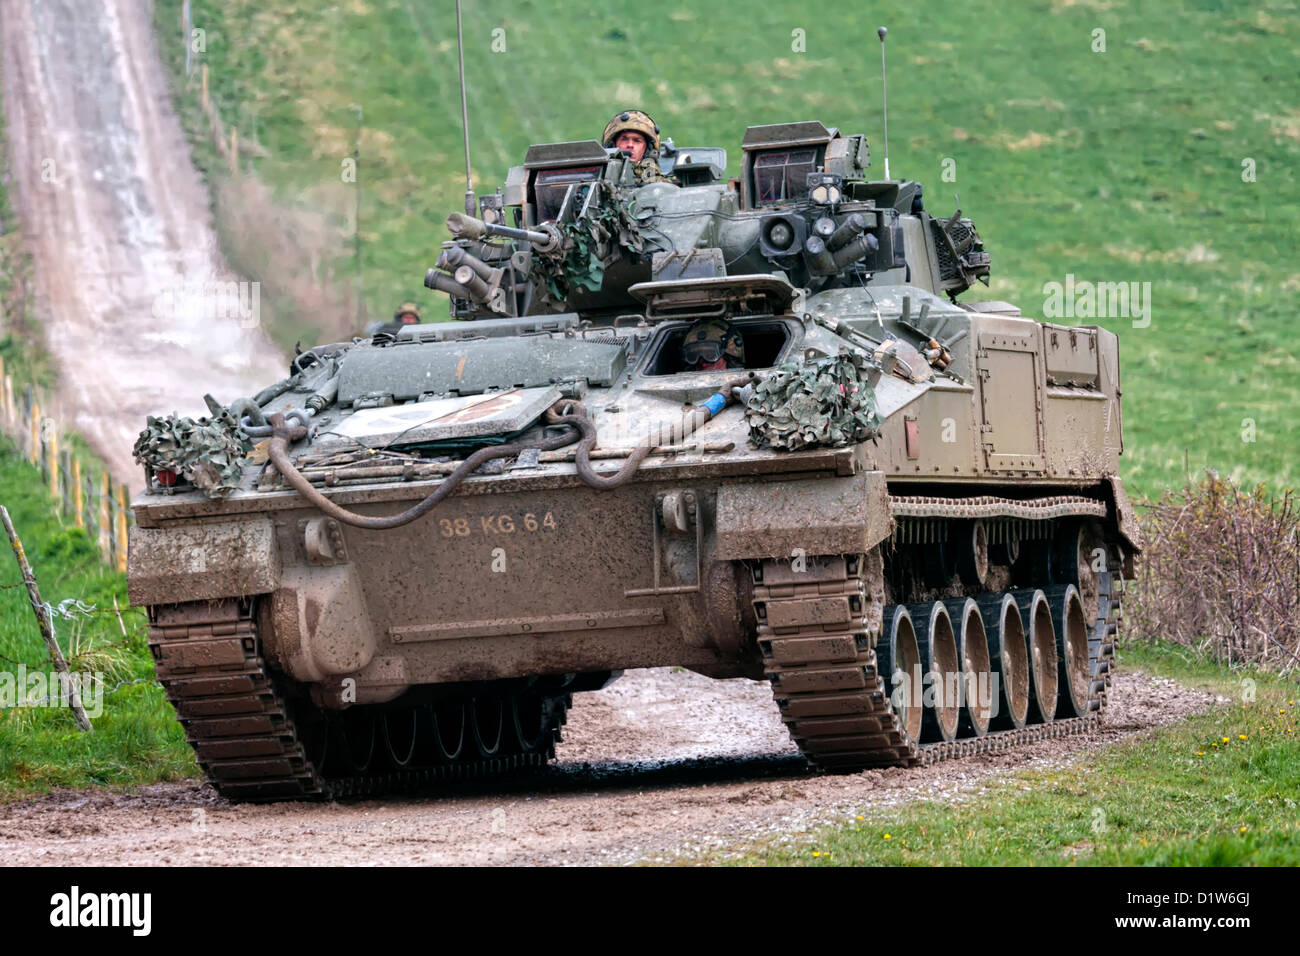 A British Army Warrior Infantry Fighting Vehicle on the Salisbury Plain Military Training Area in Wiltshire, United Kingdom. Stock Photo